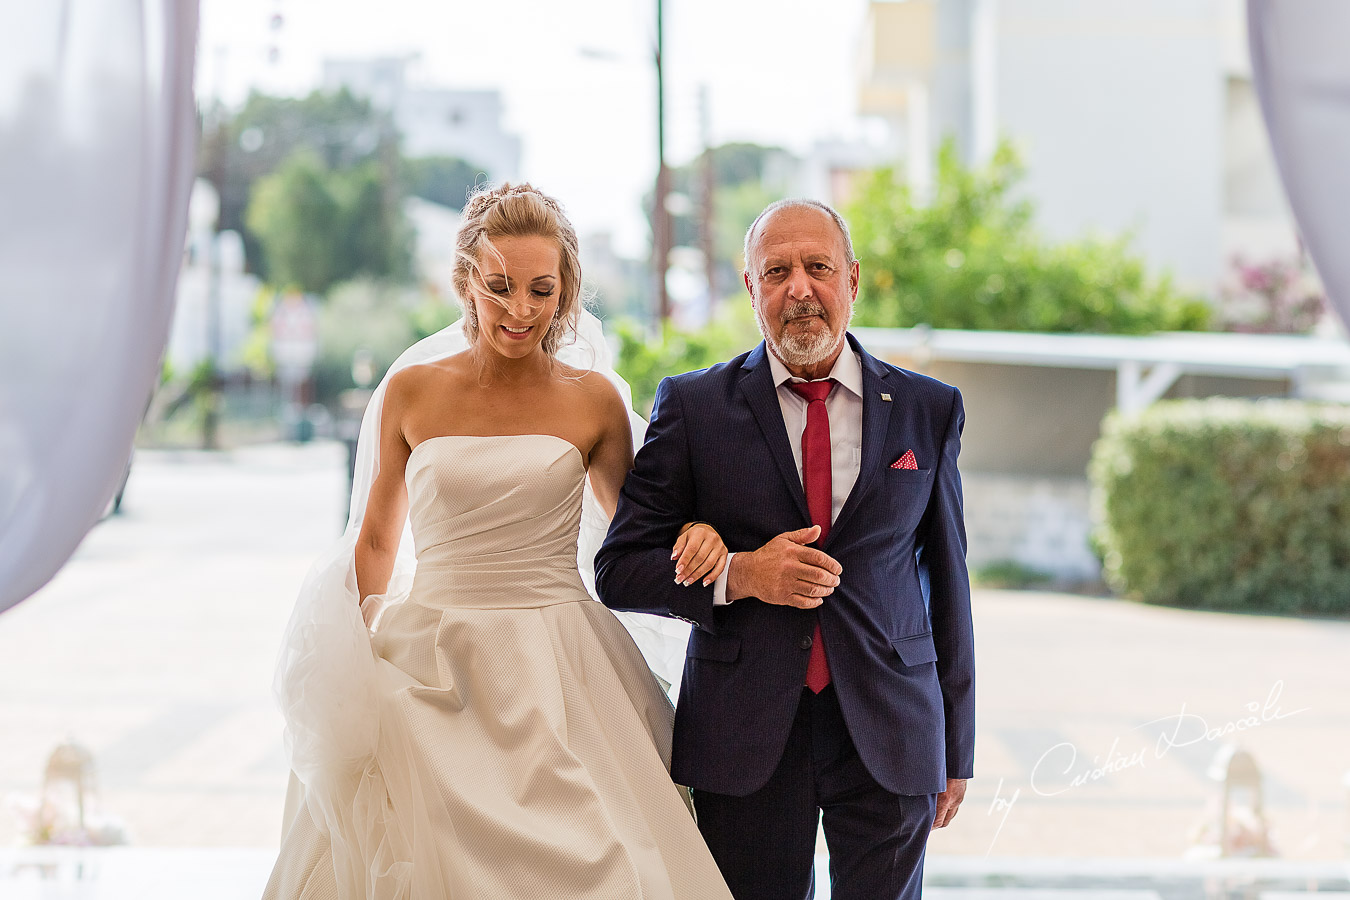 Bride's arrival photographed at a wedding in Nicosia by Cyprus Wedding Photographer Cristian Dascalu